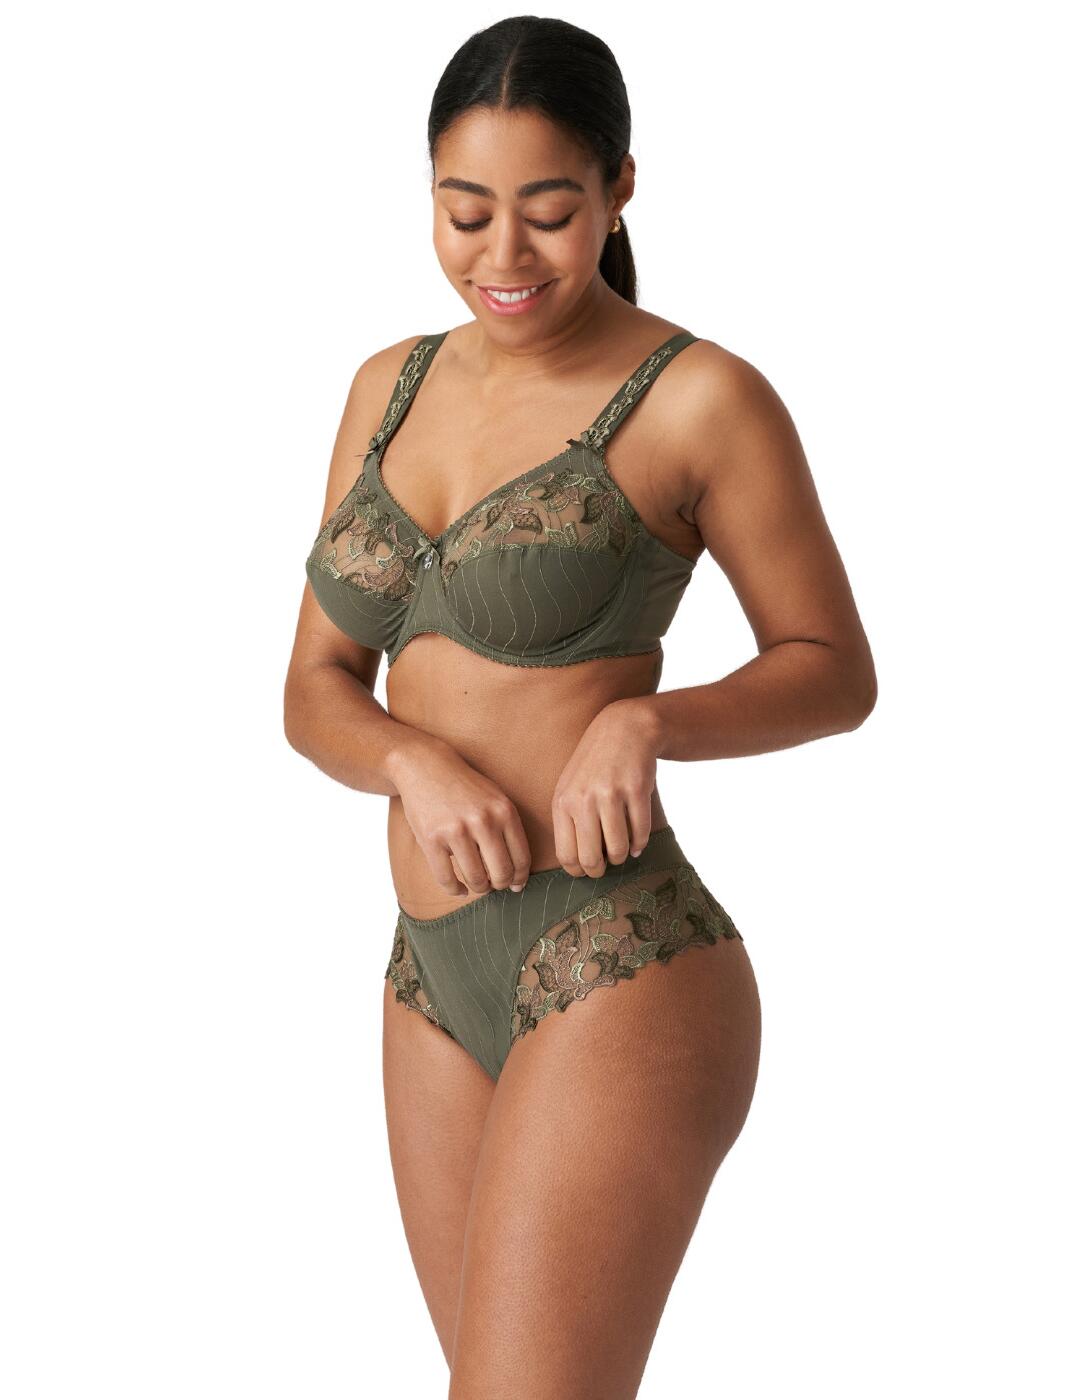 PrimaDonna DEAUVILLE paradise green full cup bra